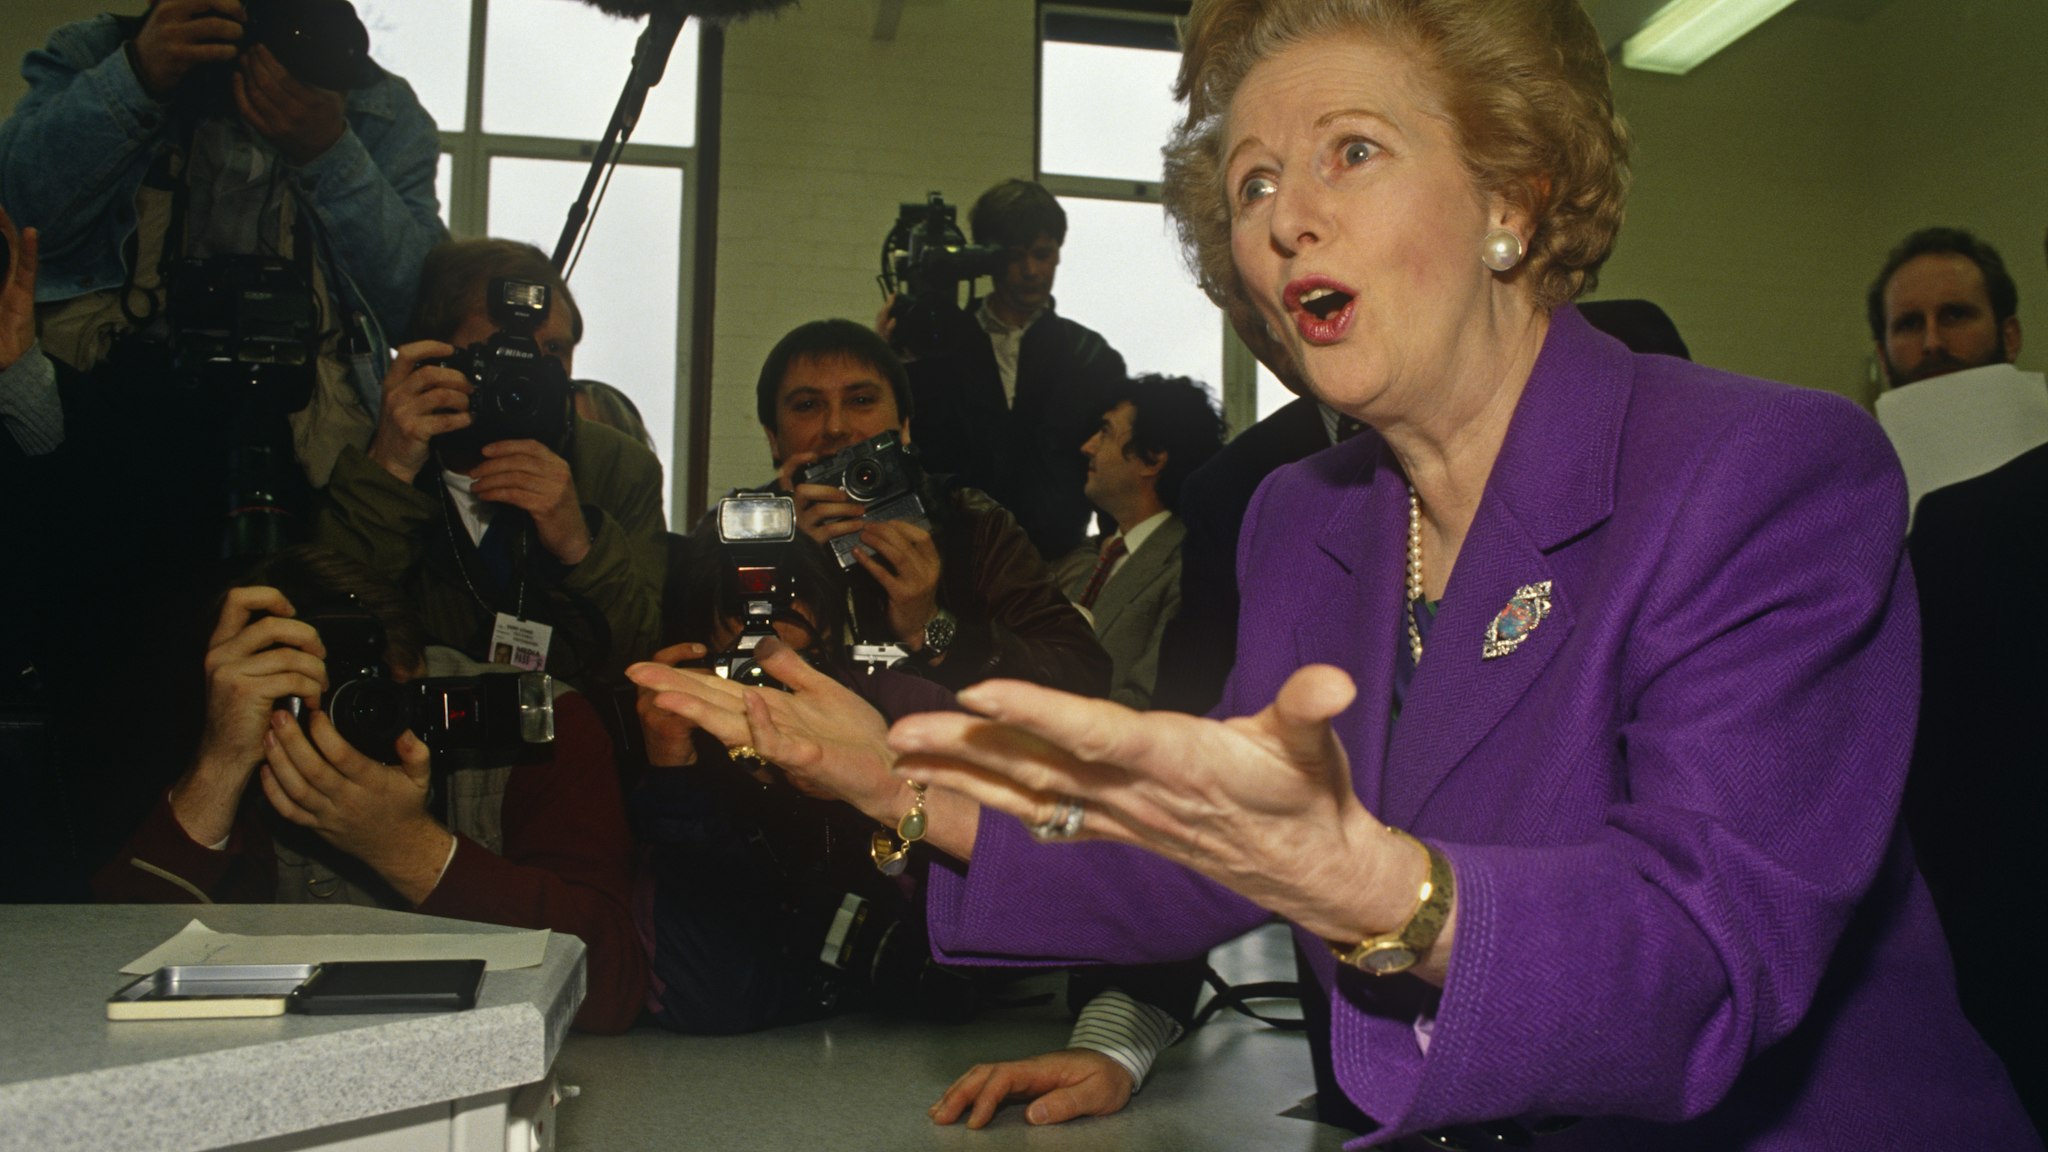 Margaret Thatcher plays up to the media at a North London school in her own constituency of Finchley during the 1992 general election. Although Thatcher had already resigned as Prime Minister in November 1990, John Major won the ensuing leadership election later that year. Photographers and cameramen surround the former-Prime Minister who is wearing a purple suit and matching broach. She is mid-sentence and has found something amusing to respond to the chants of the media. We see cameras, sound booms and flashes all prepared to photograph this famous statesman including Tom Stoddart who is making eye-contact with the viewer. (Photo by In Pictures Ltd./Corbis via Getty Images)